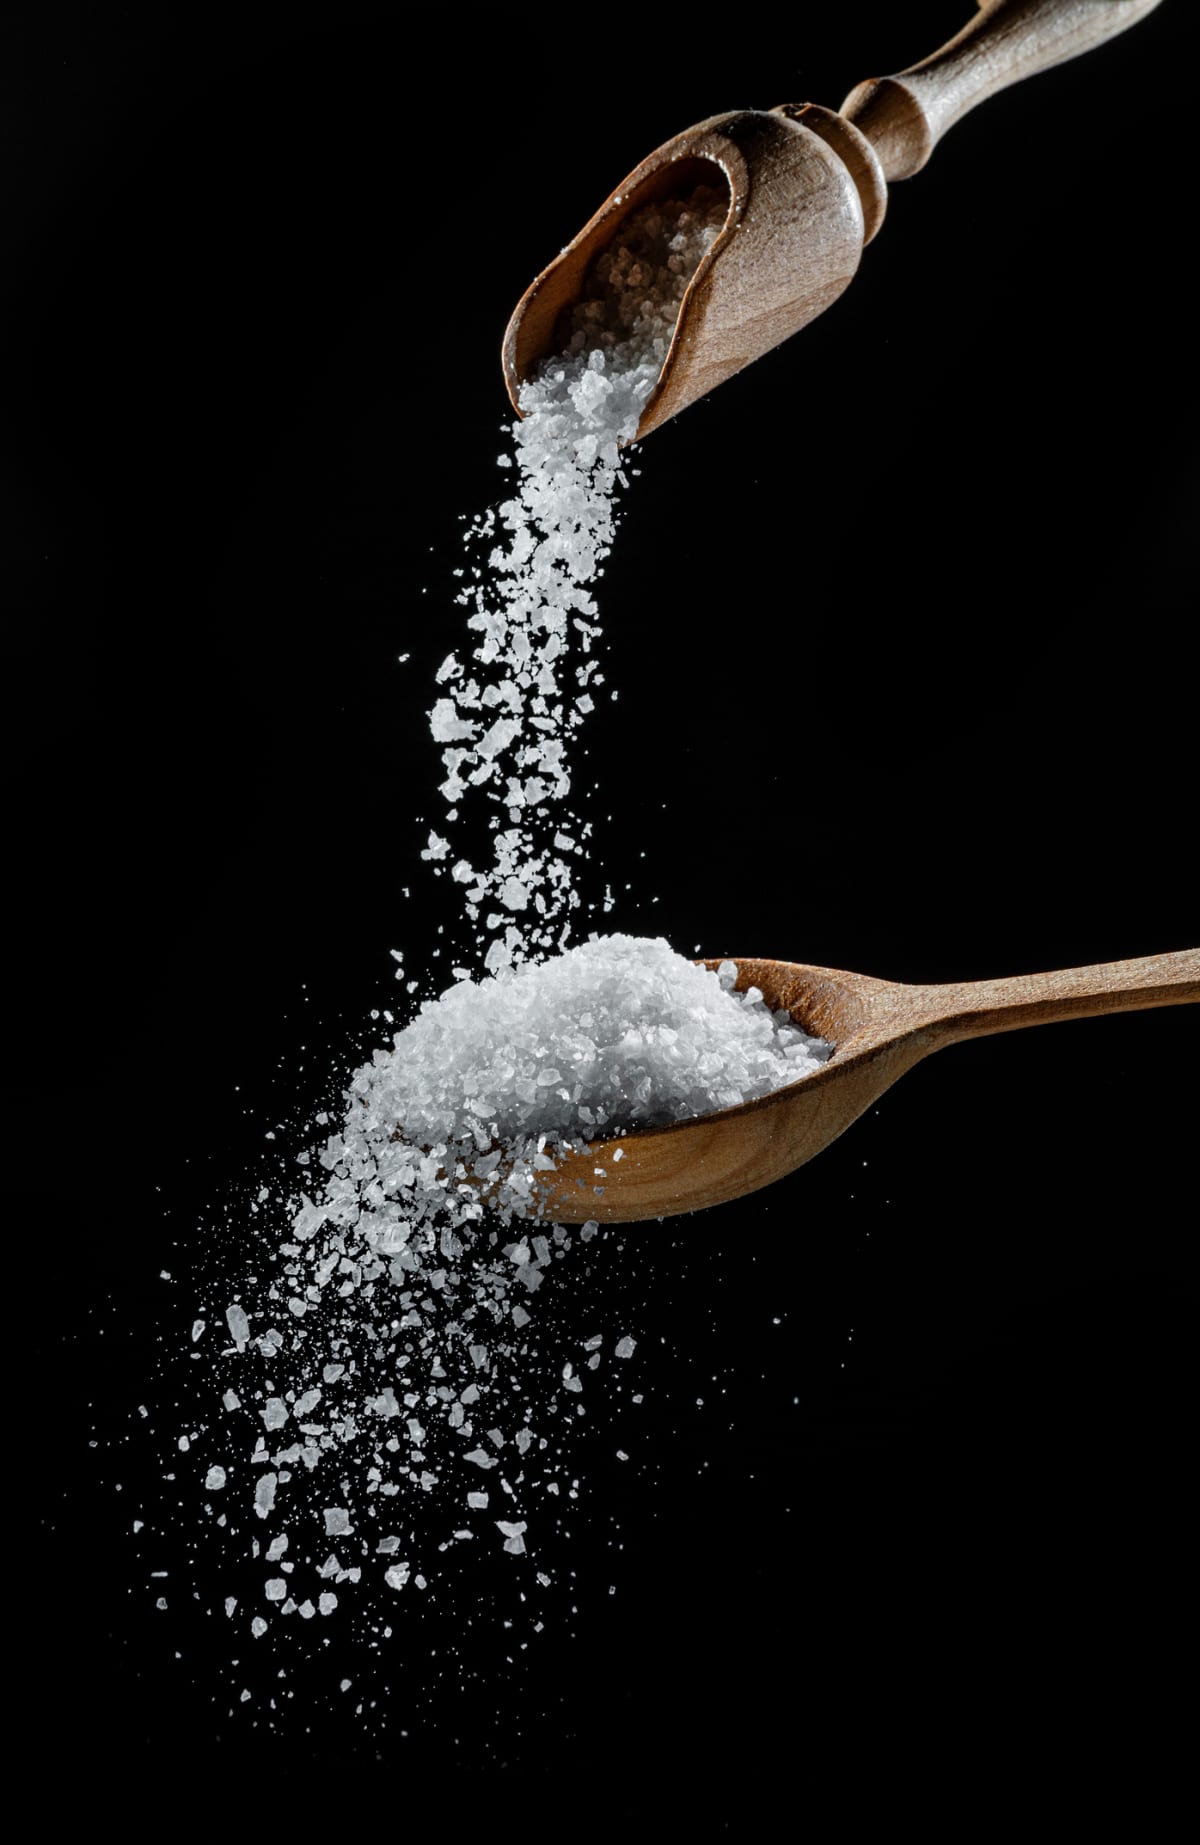 Edible salt crystals falling down into a wooden spoon against black background